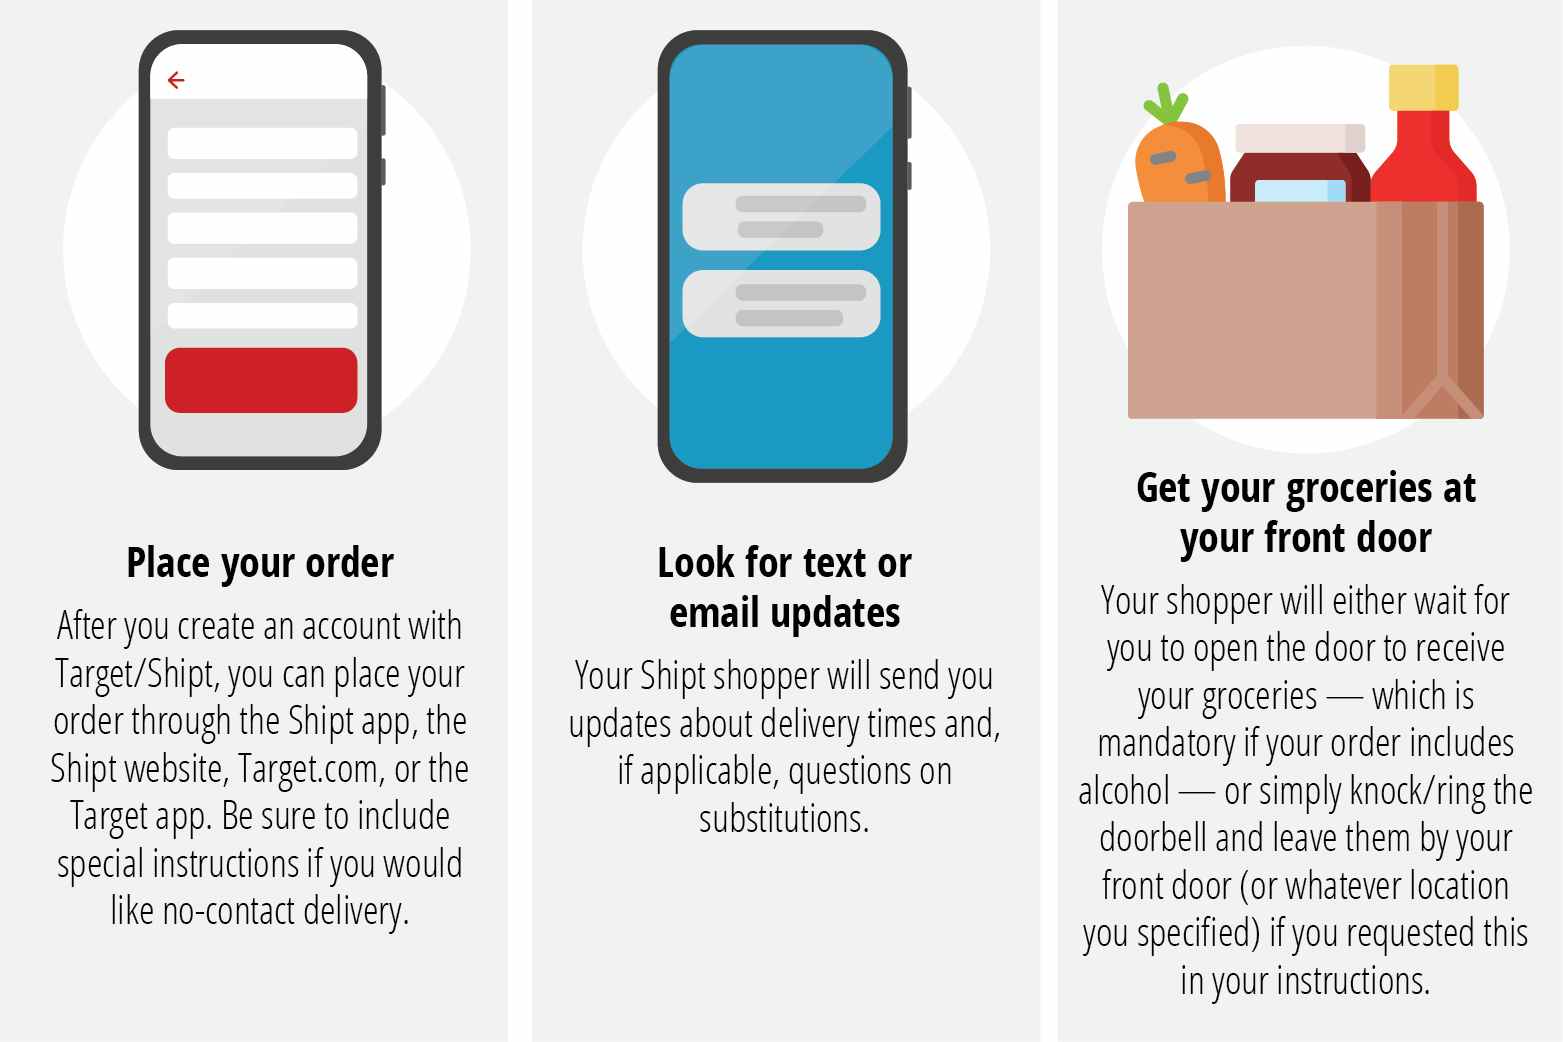 How to place an order for same day delivery at target in three easy step